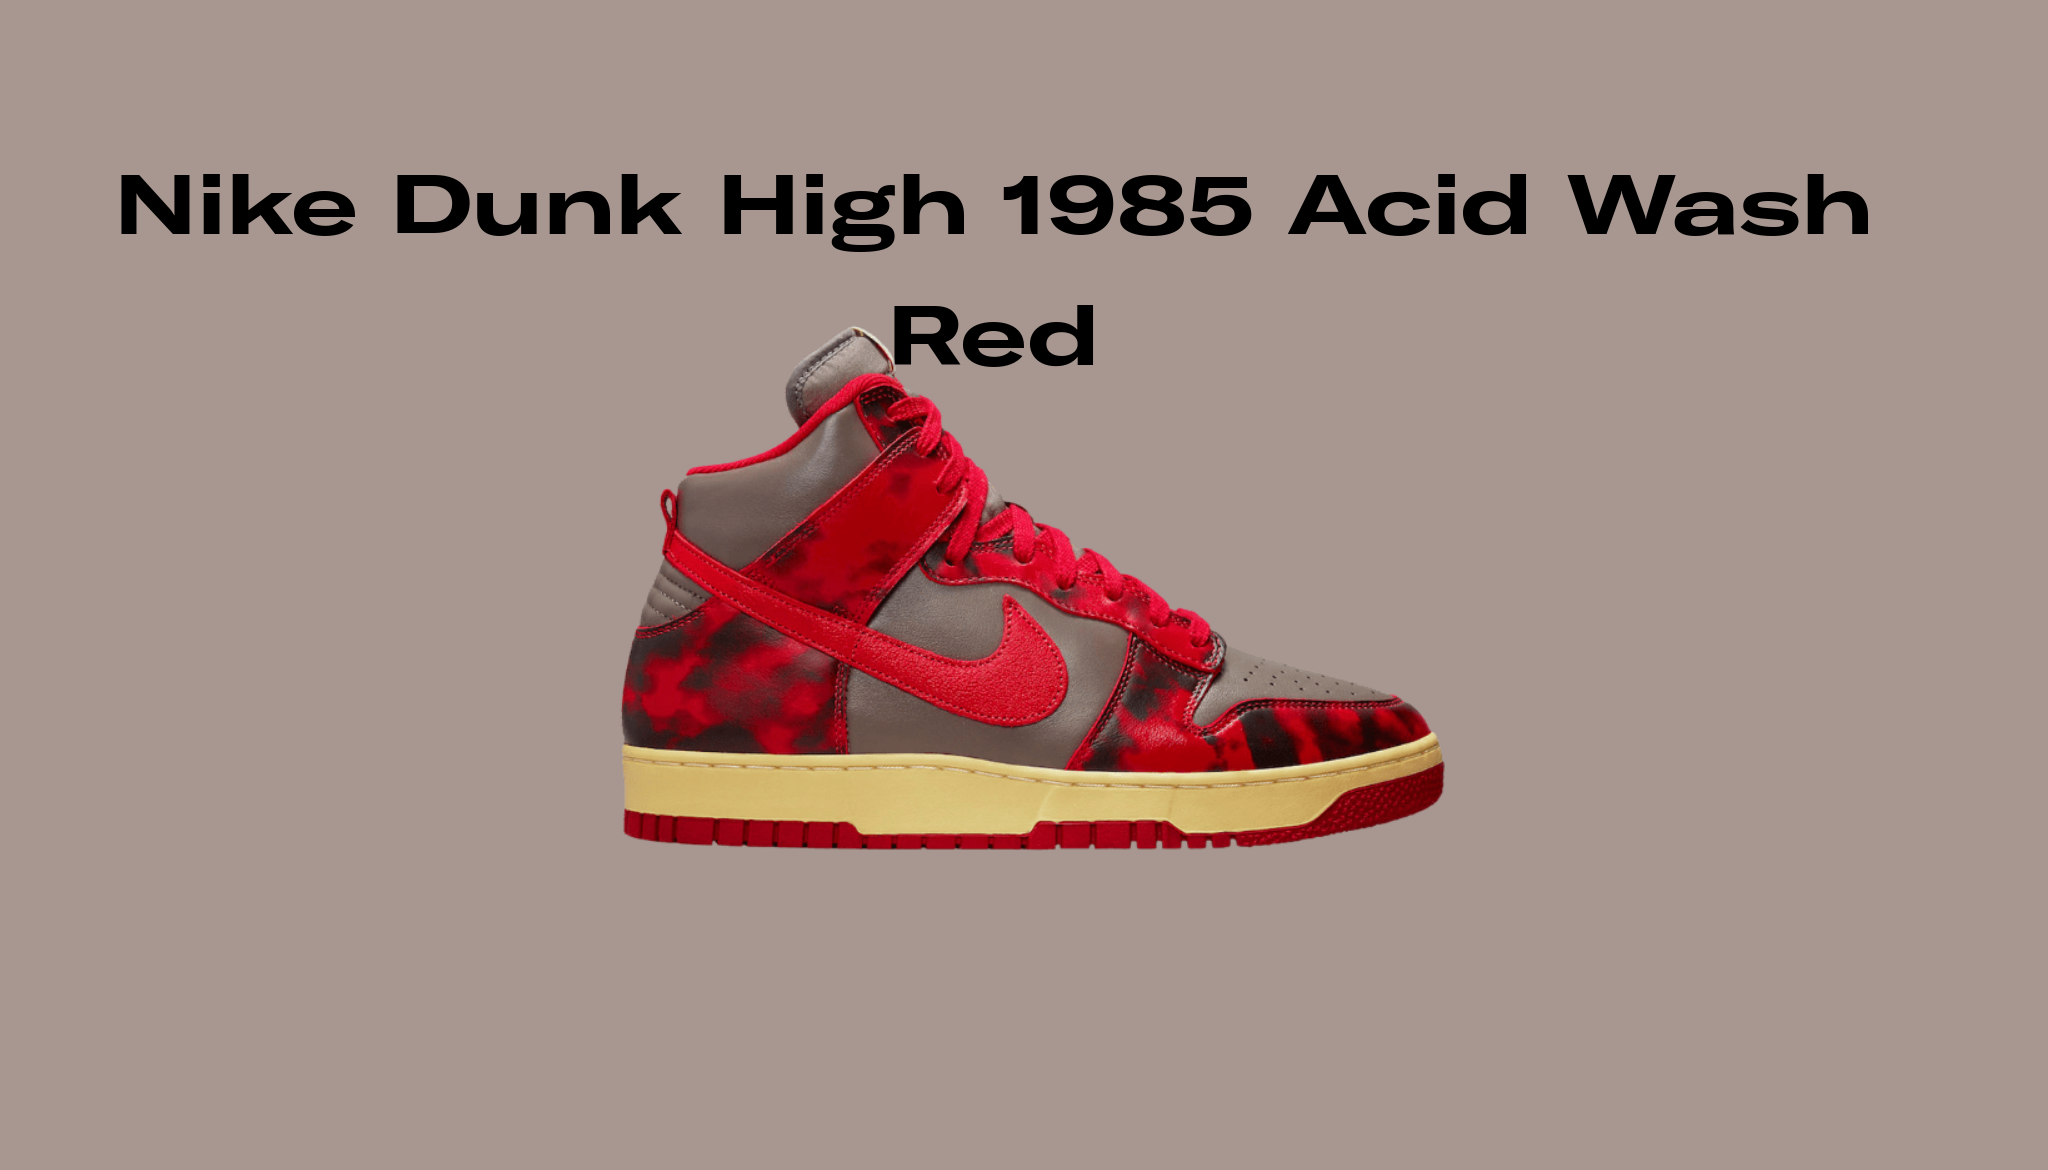 Nike Dunk High 1985 Acid Wash Red, Raffles and Release Date | Sole 